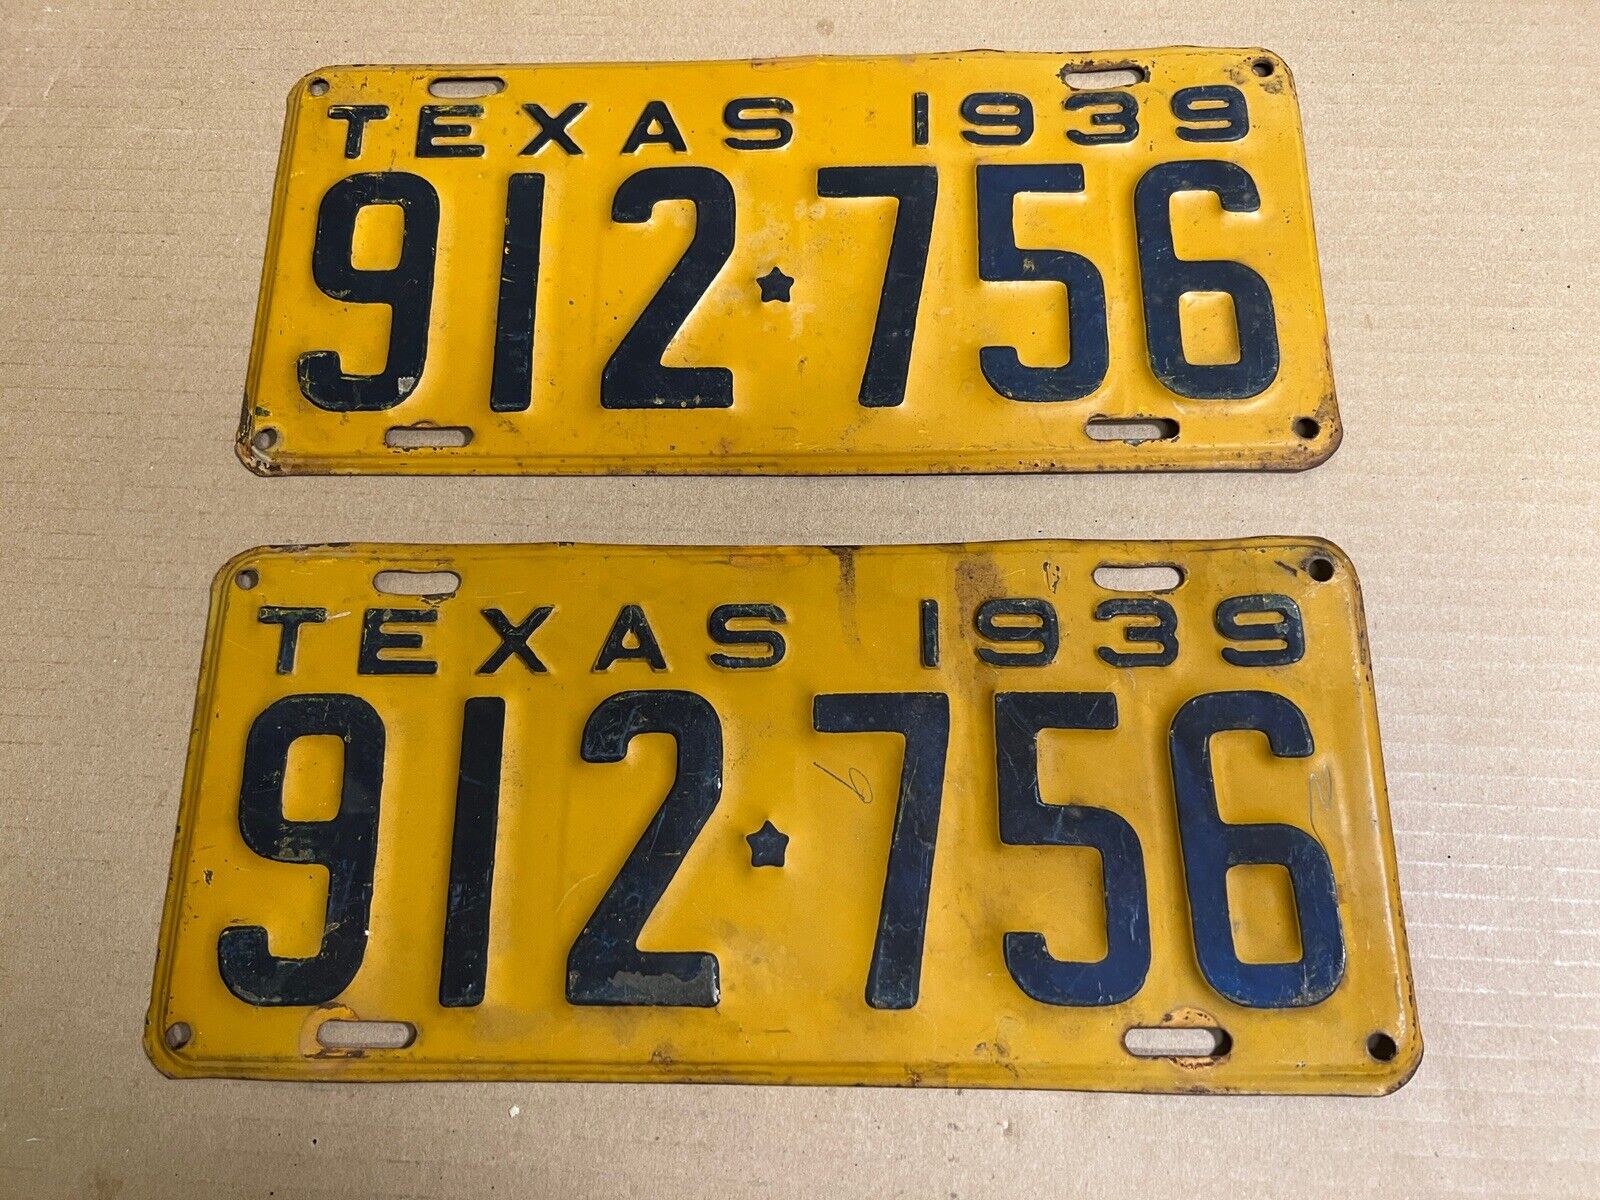 VINTAGE 1939 TEXAS LICENSE PLATE SET 912 756 UNRESTORED IN GREAT CONDITION